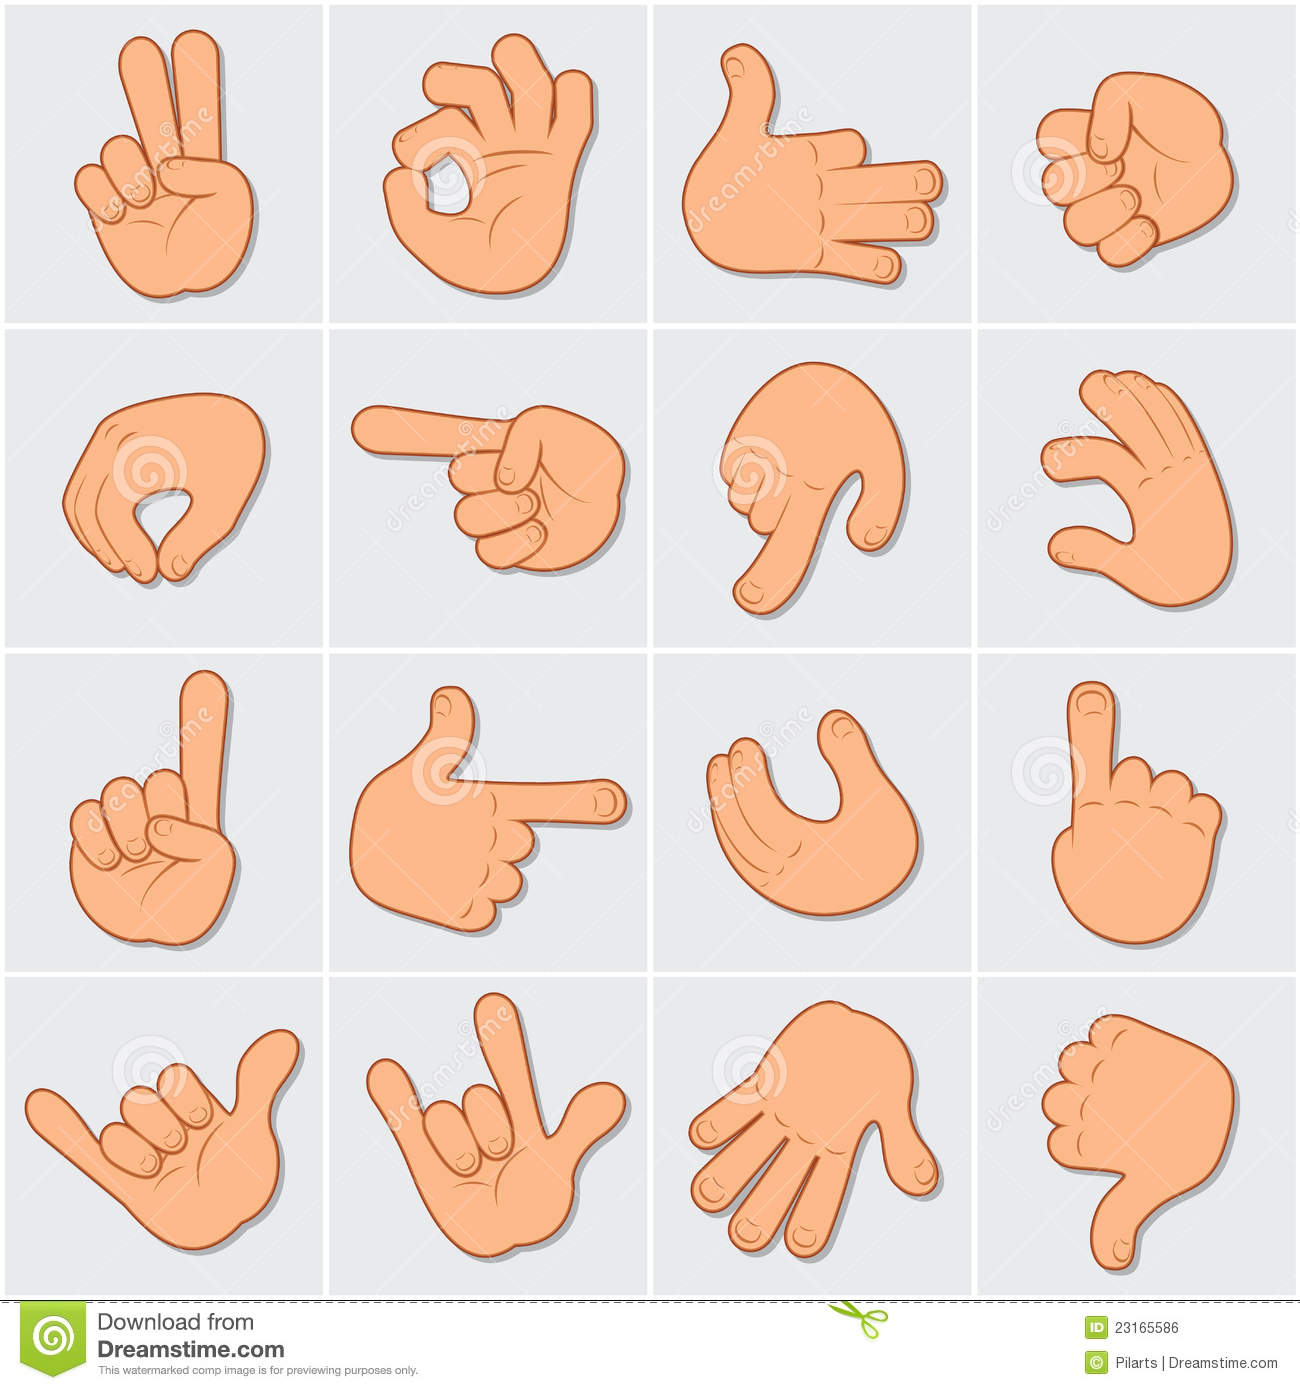 gesture clipart royalty free rf hand gesture clipart illustration.